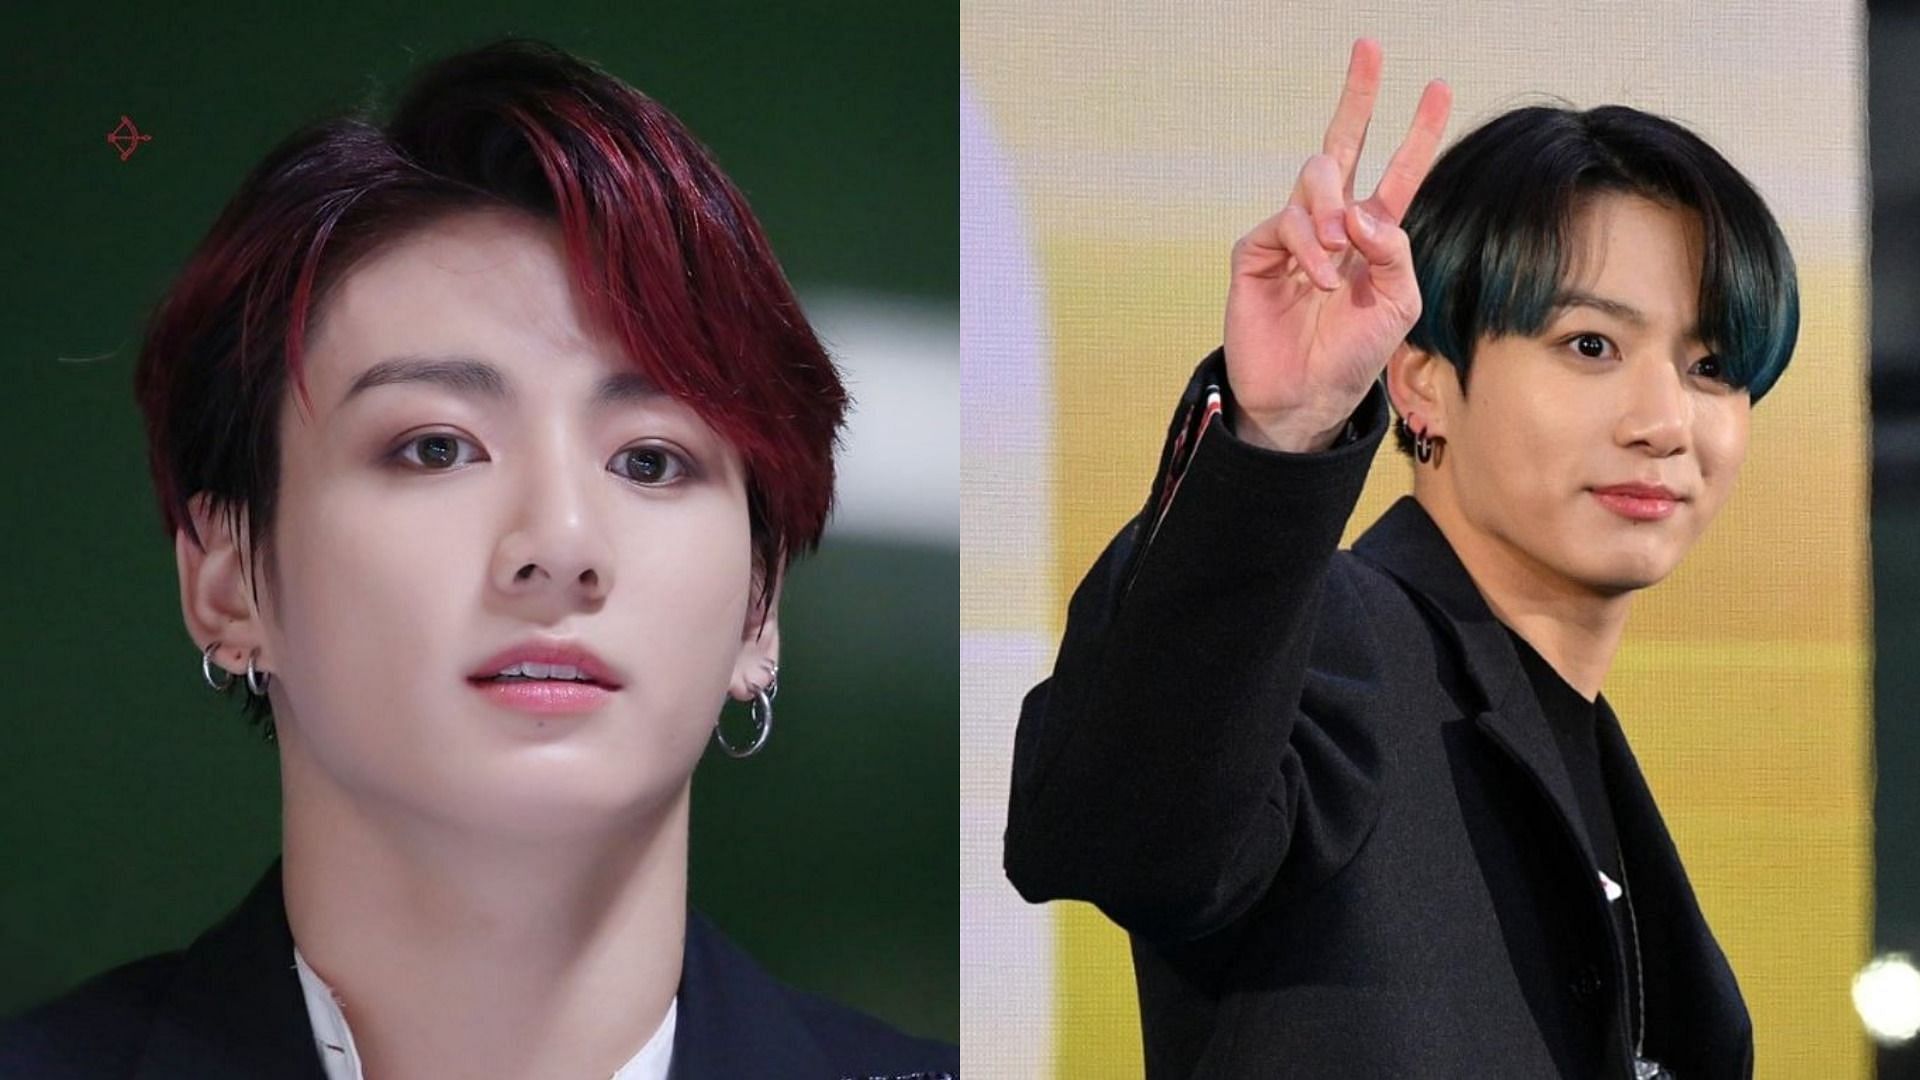 BTS Jungkook continues to impress fans (Image via Getty Images)